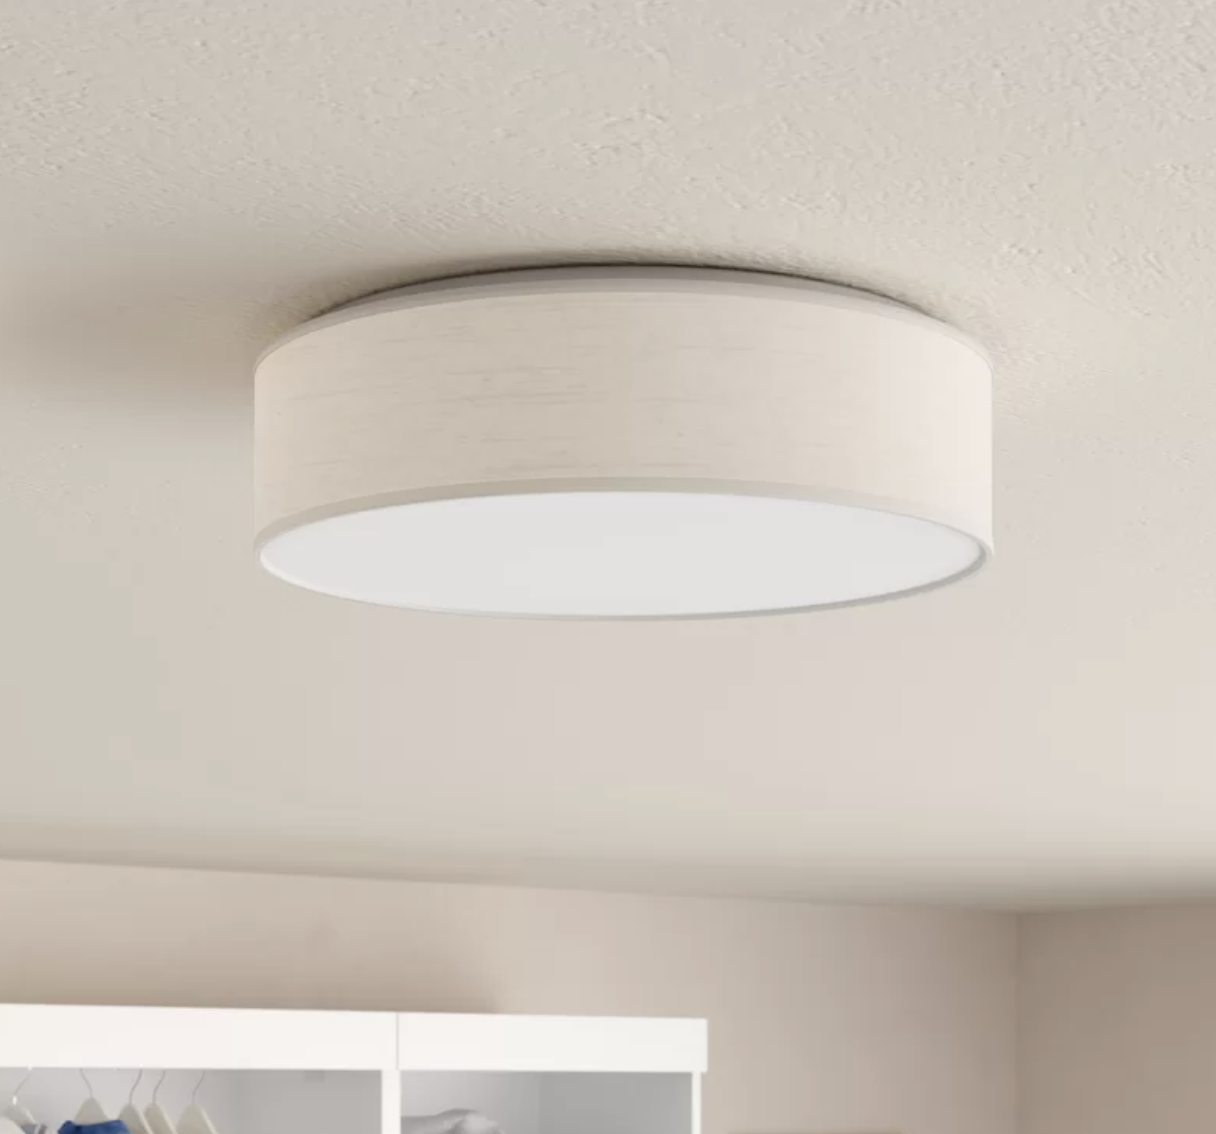 A short round white lighting fixture mounted to a ceiling